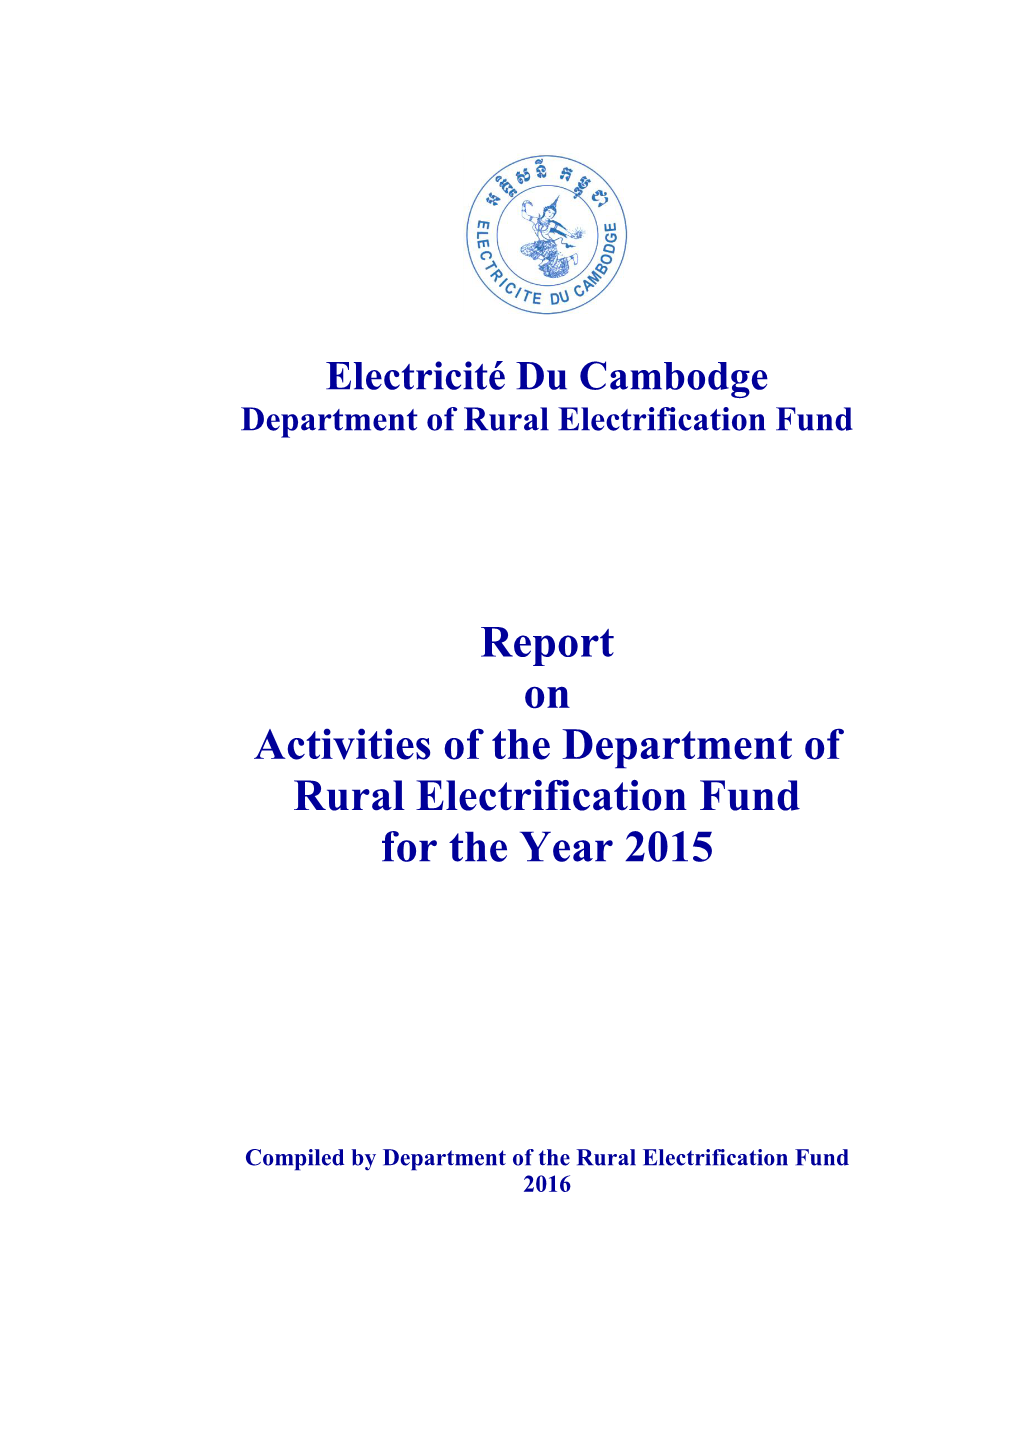 Department of Rural Electrification Fund